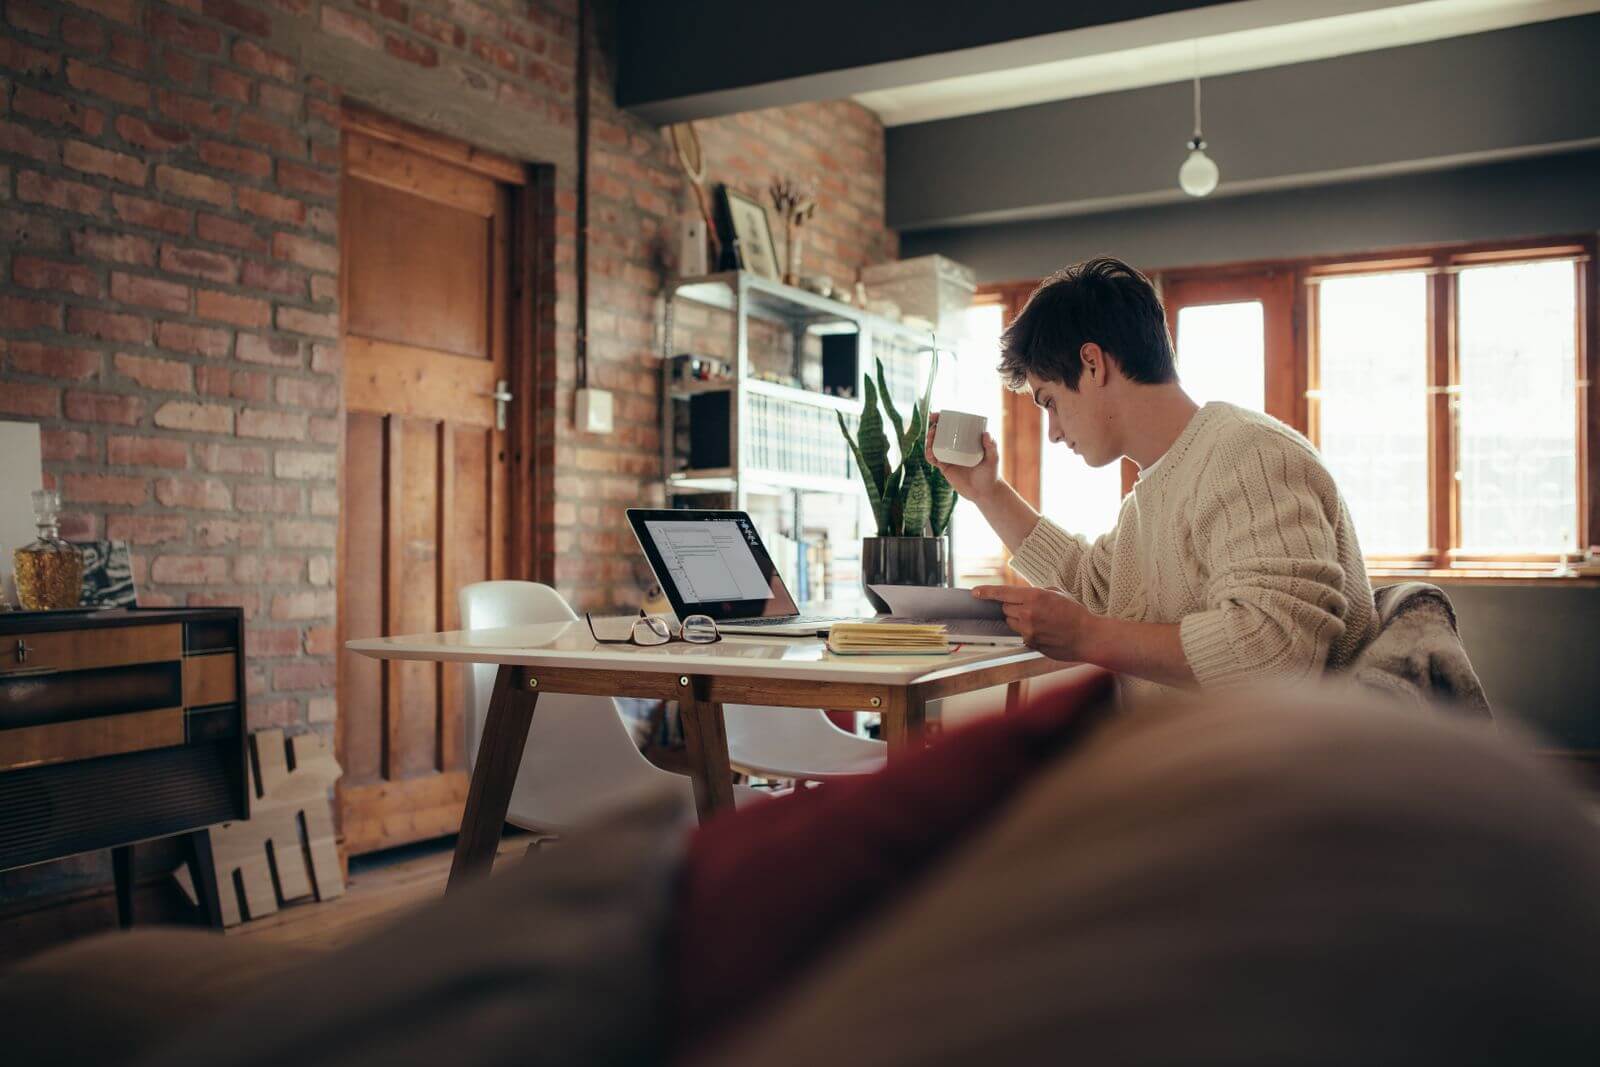 What Are the Benefits of Letting Your Employees Work from Home?